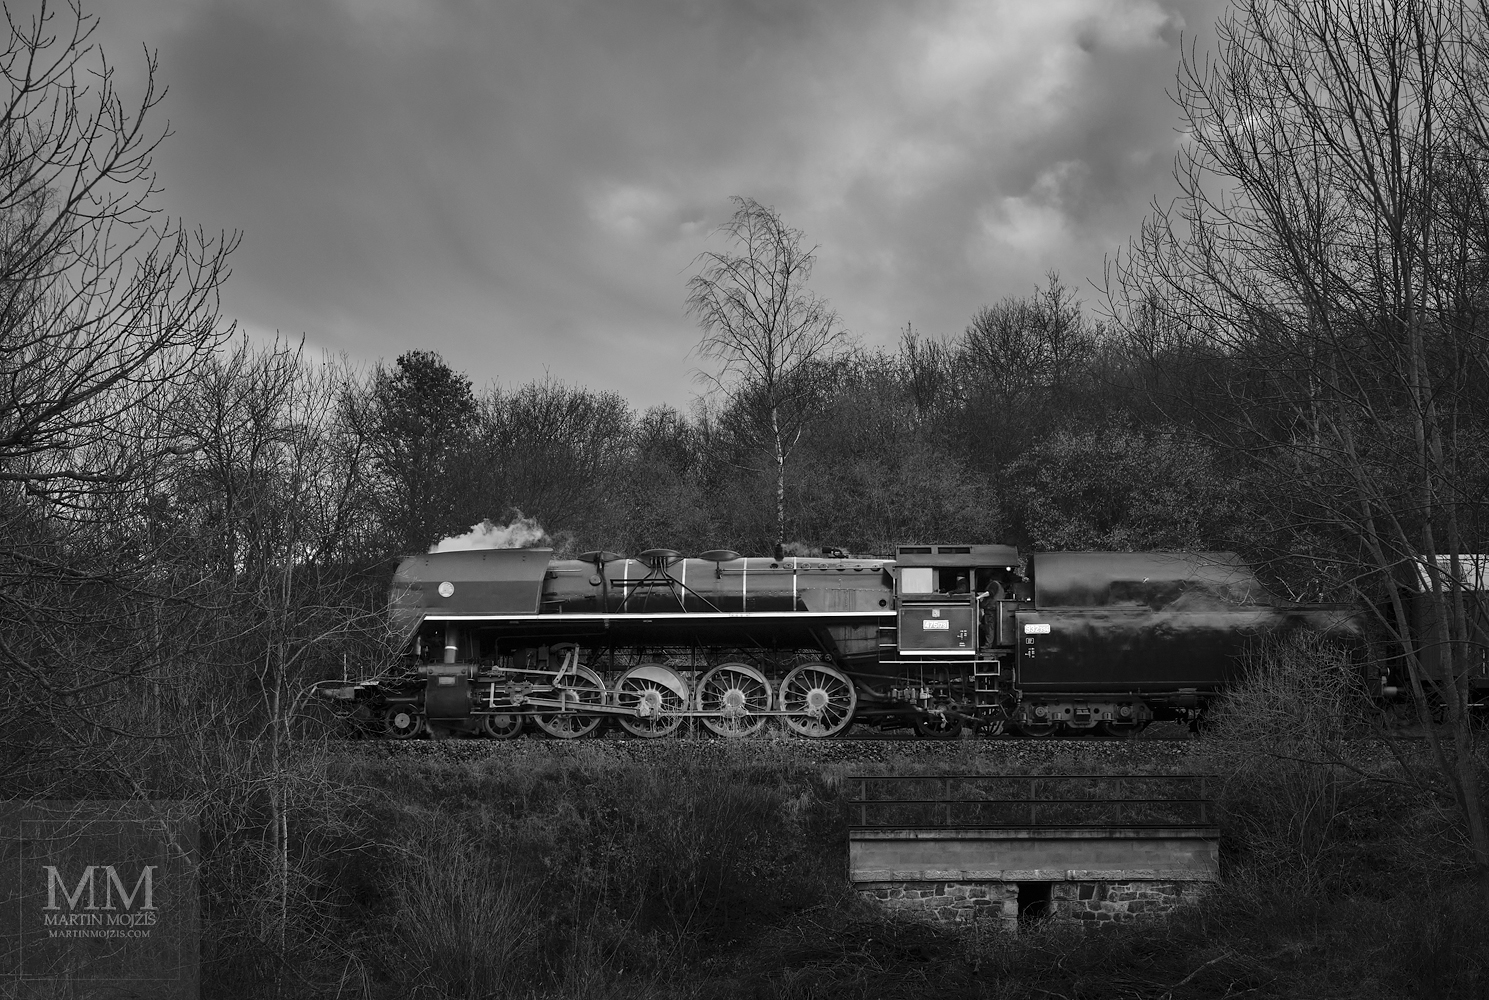 Fine Art large format black and white photograph of the steam train. Martin Mojzis.